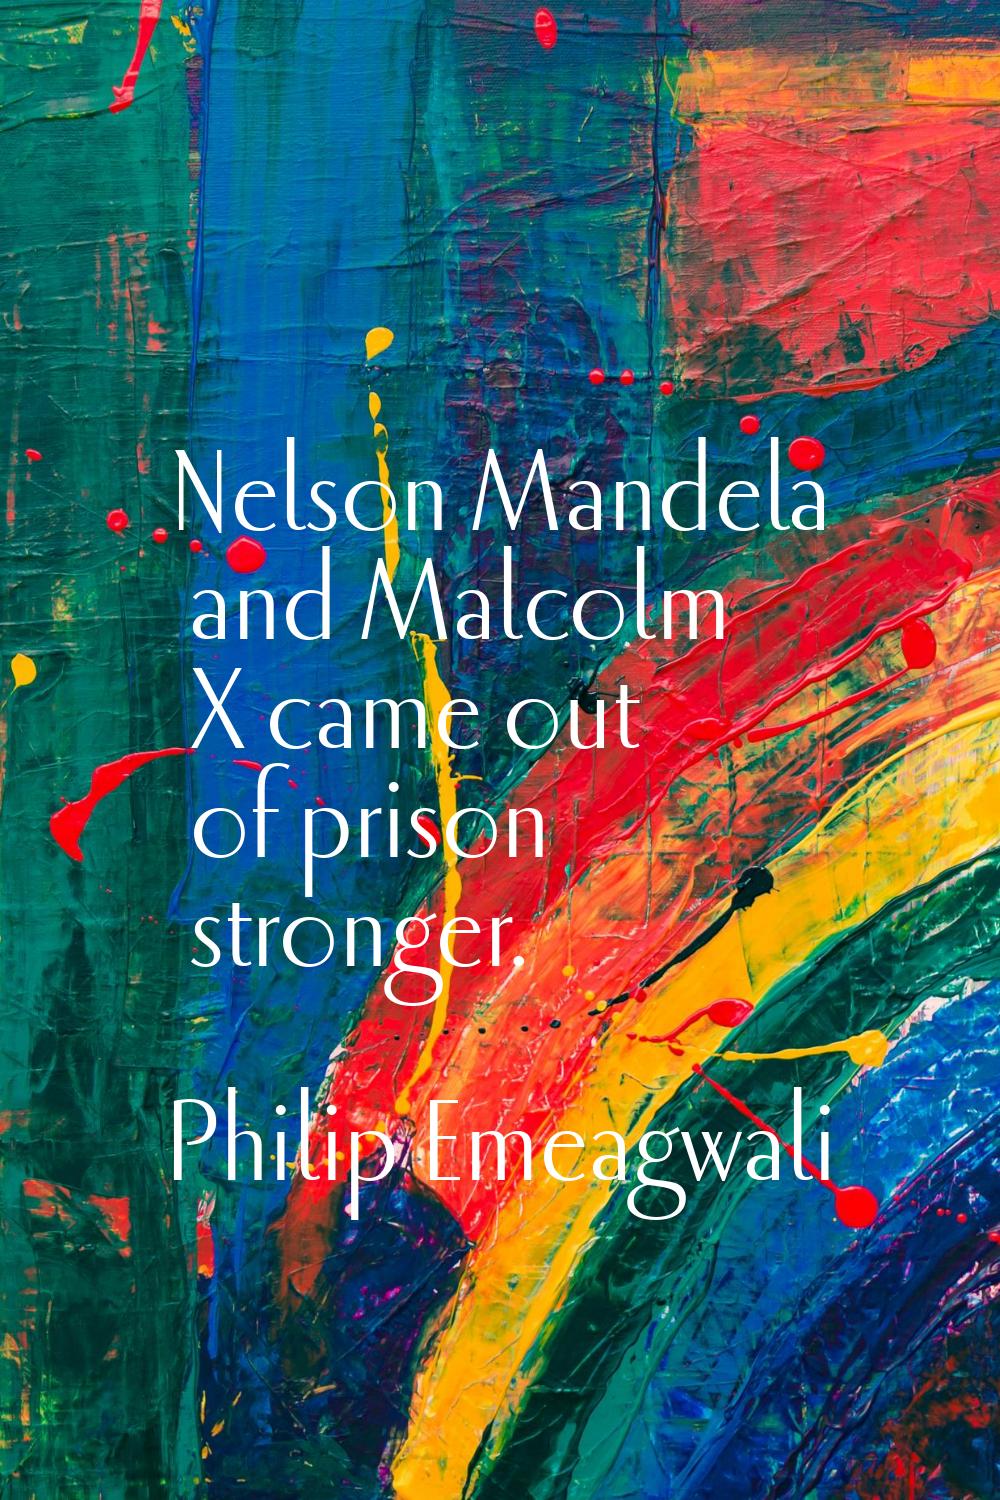 Nelson Mandela and Malcolm X came out of prison stronger.